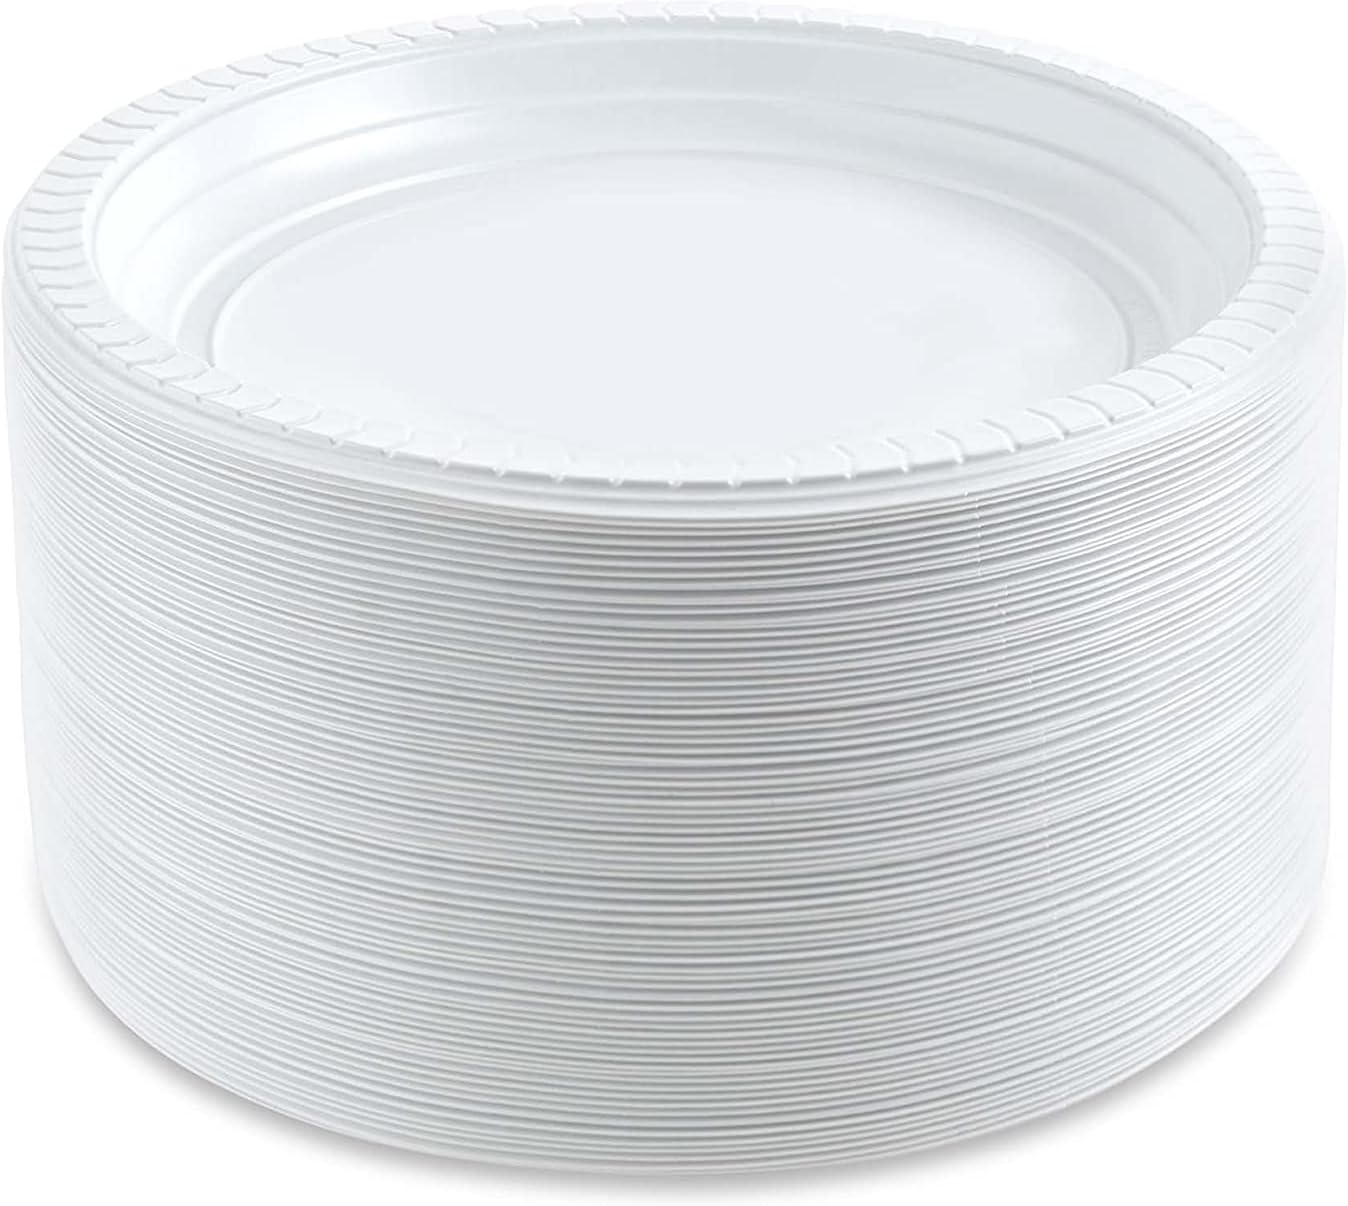 PLASTICPRO 6 inch Round Plastic Plates Microwaveable, Disposable, White, Dinnerware 100 Count